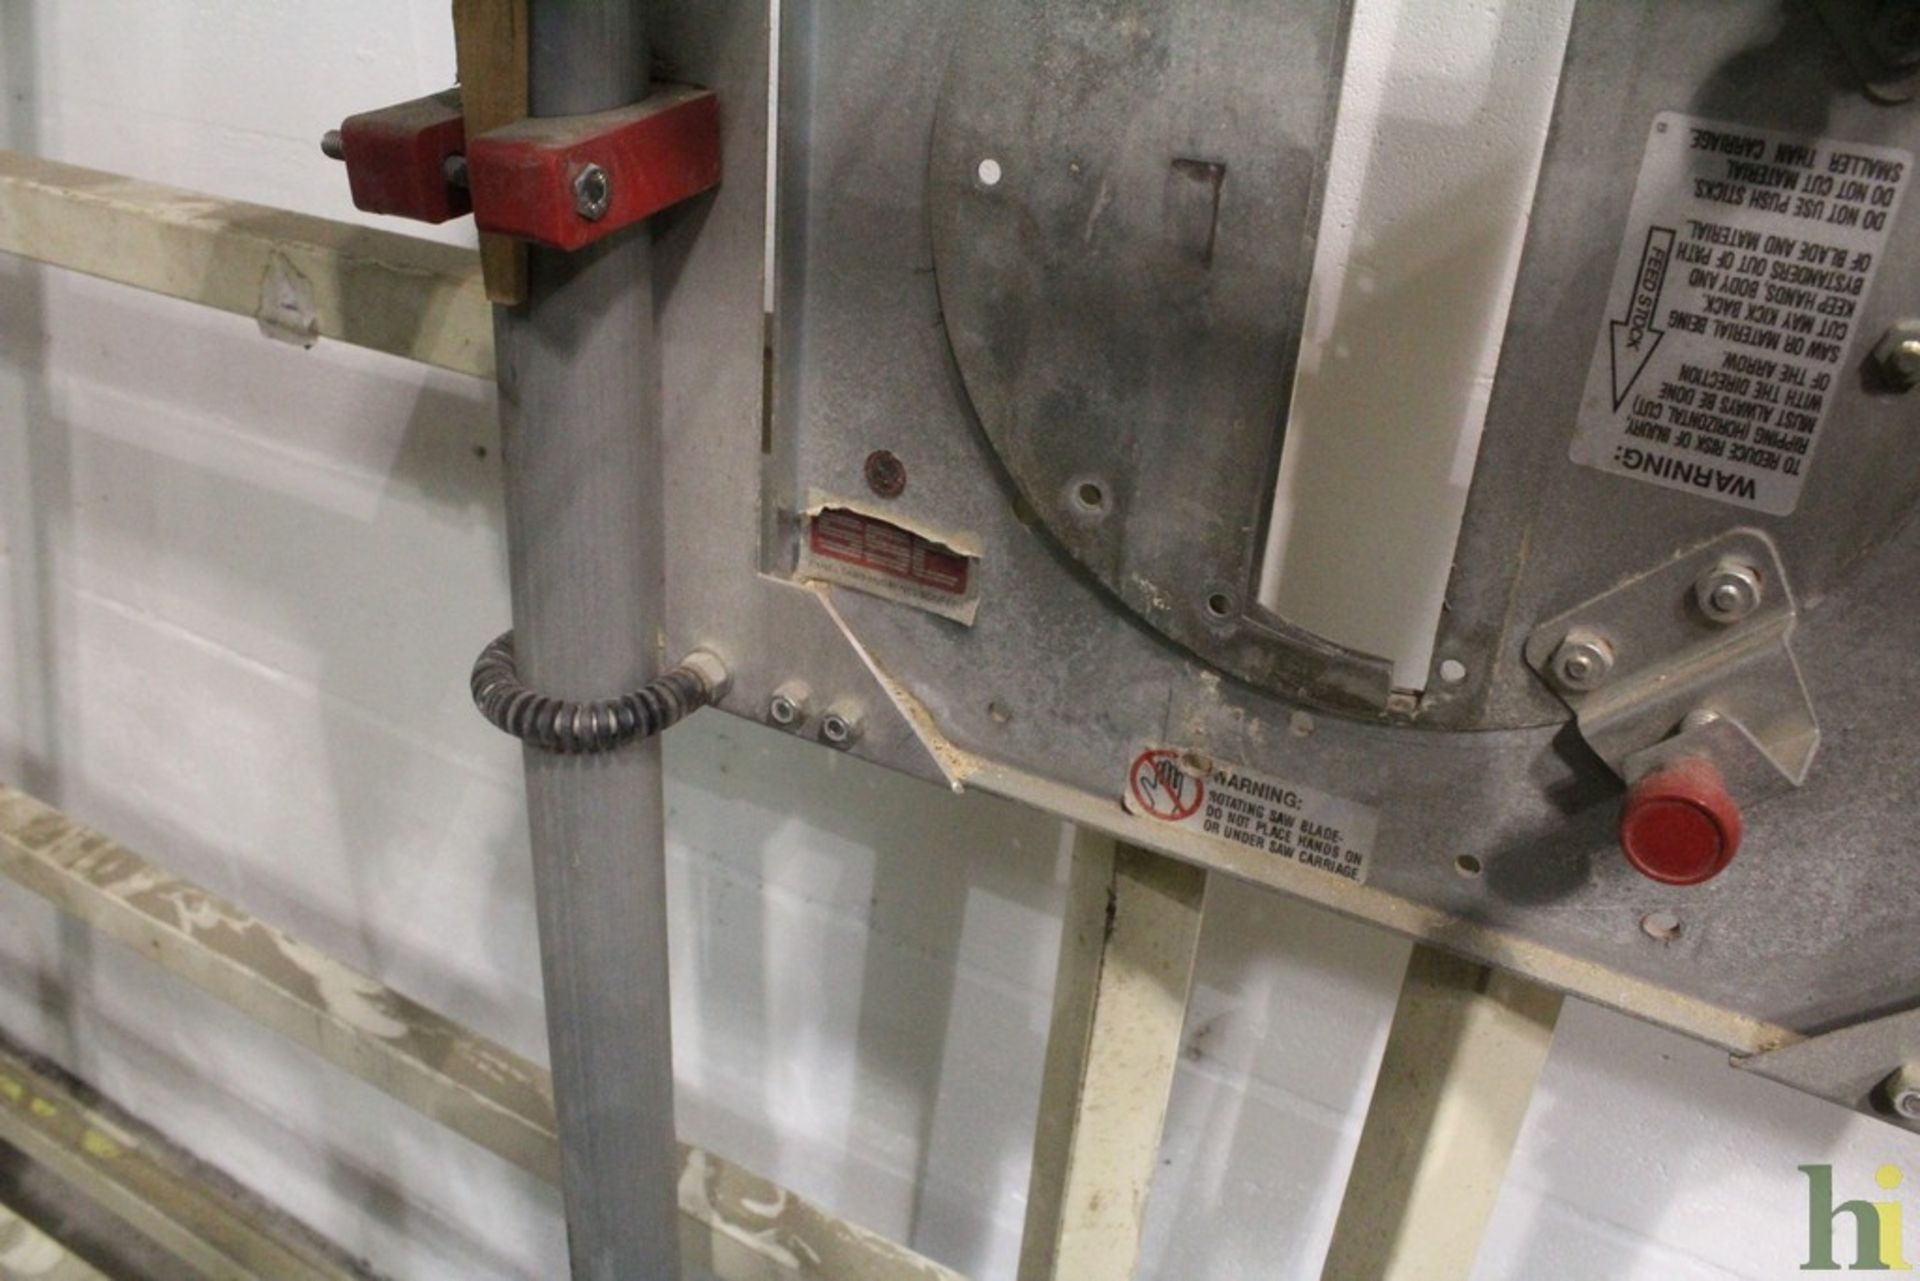 SAFETY SPEED CUT VERTICAL PANEL SAW 10' X 5', NO SAW - Image 2 of 2